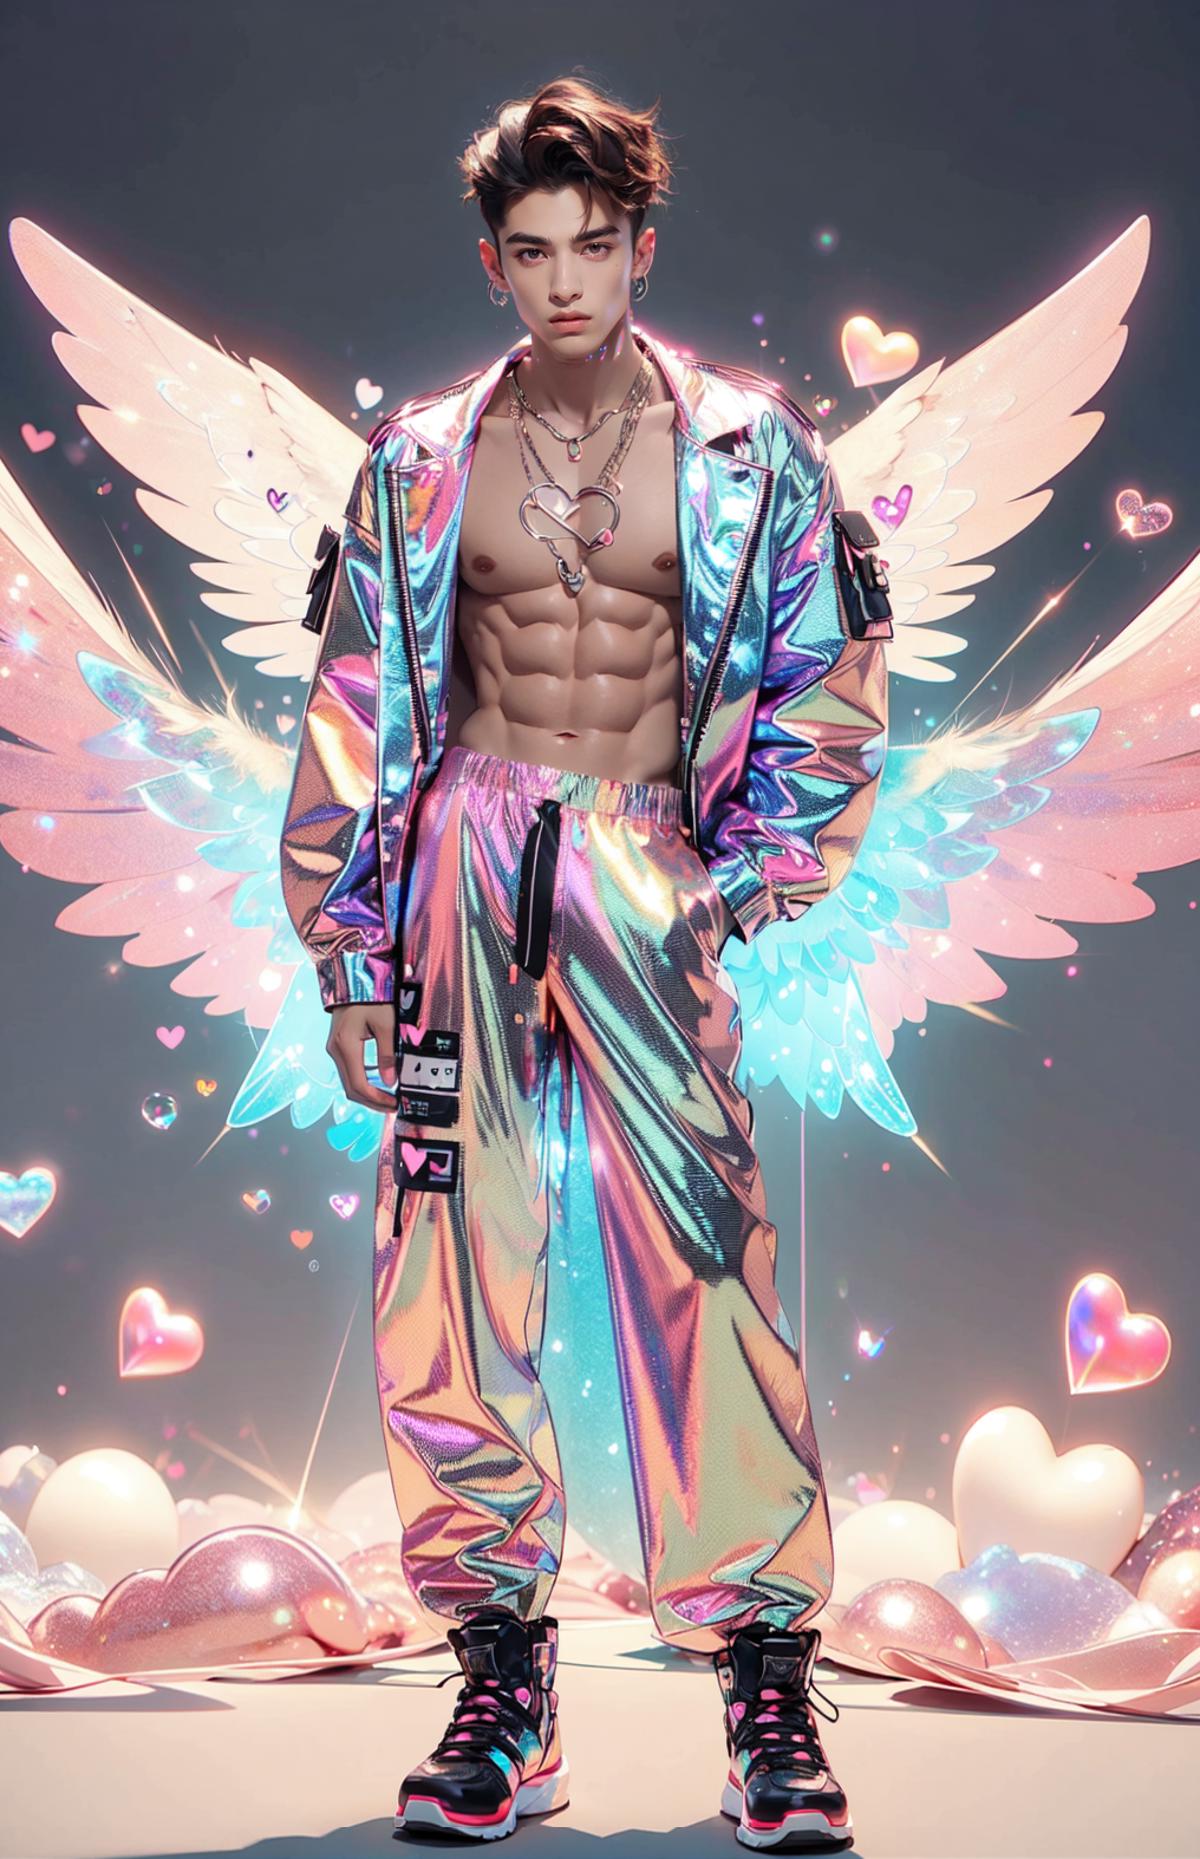 A shirtless man with wings and a glittery, rainbow-colored outfit on.